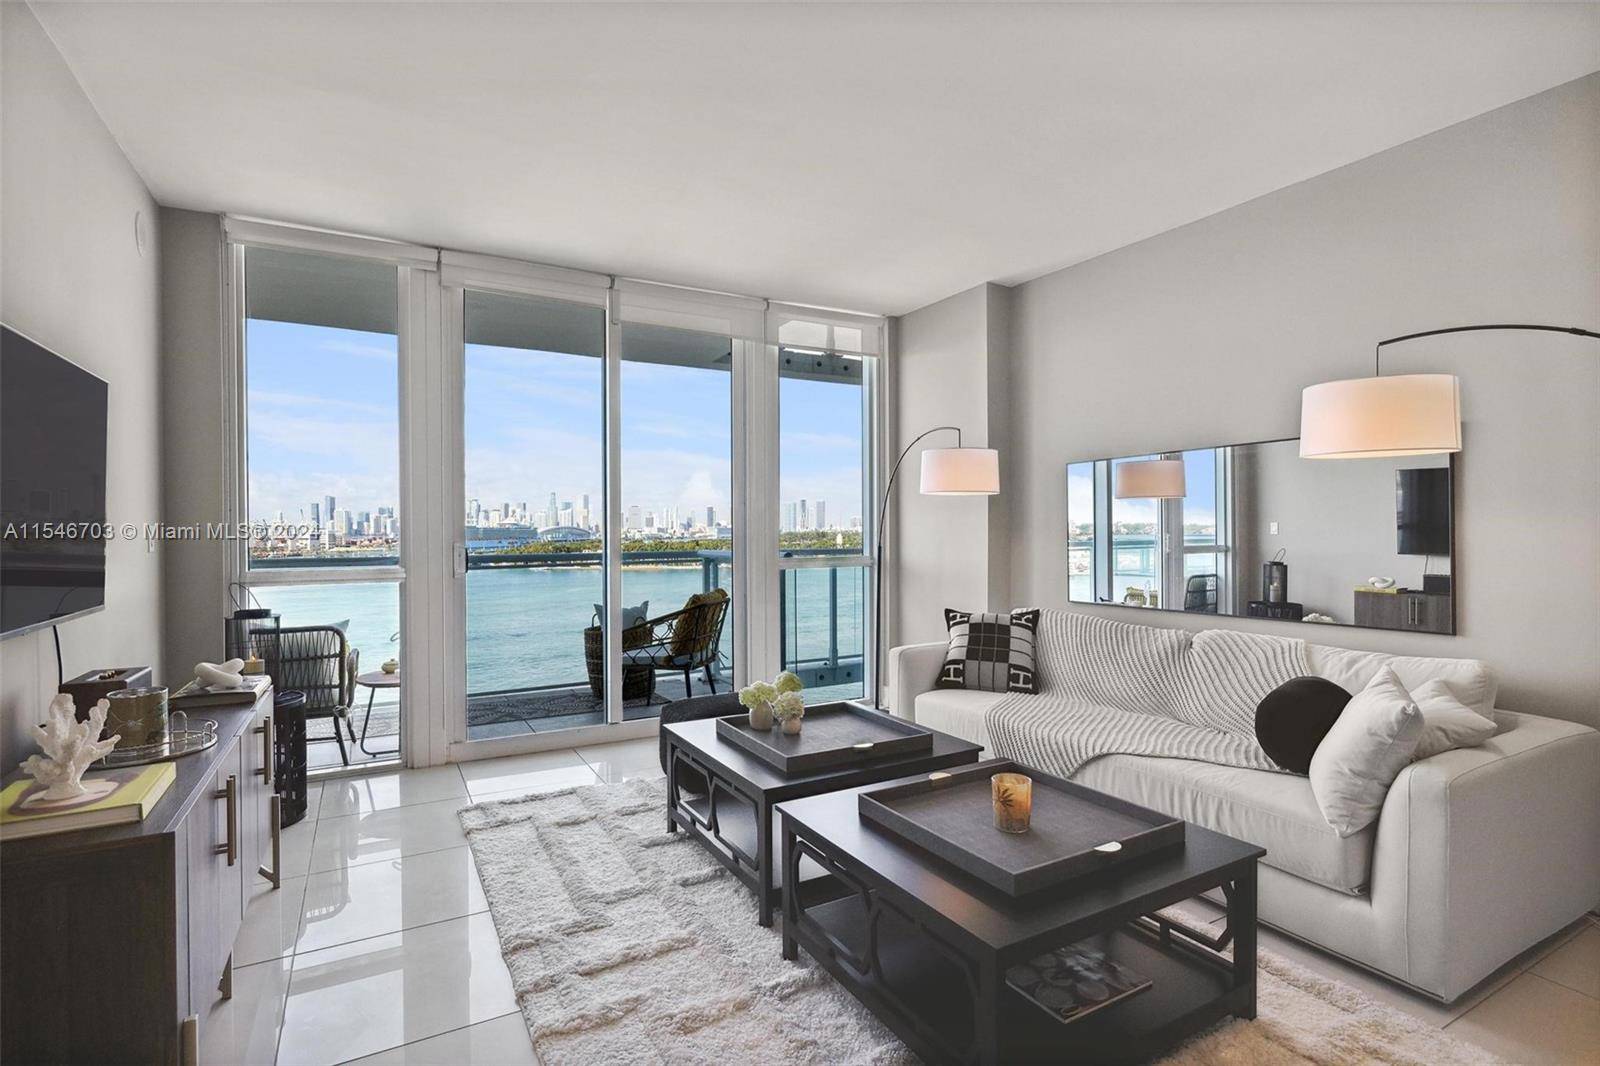 Stunning view over Biscayne Bay, Star Island and Miami's skyline from this tastefully decorated one bedroom at the Bentley Bay 5 star bayfront luxury residence adjacent to South Beach's trendy ...